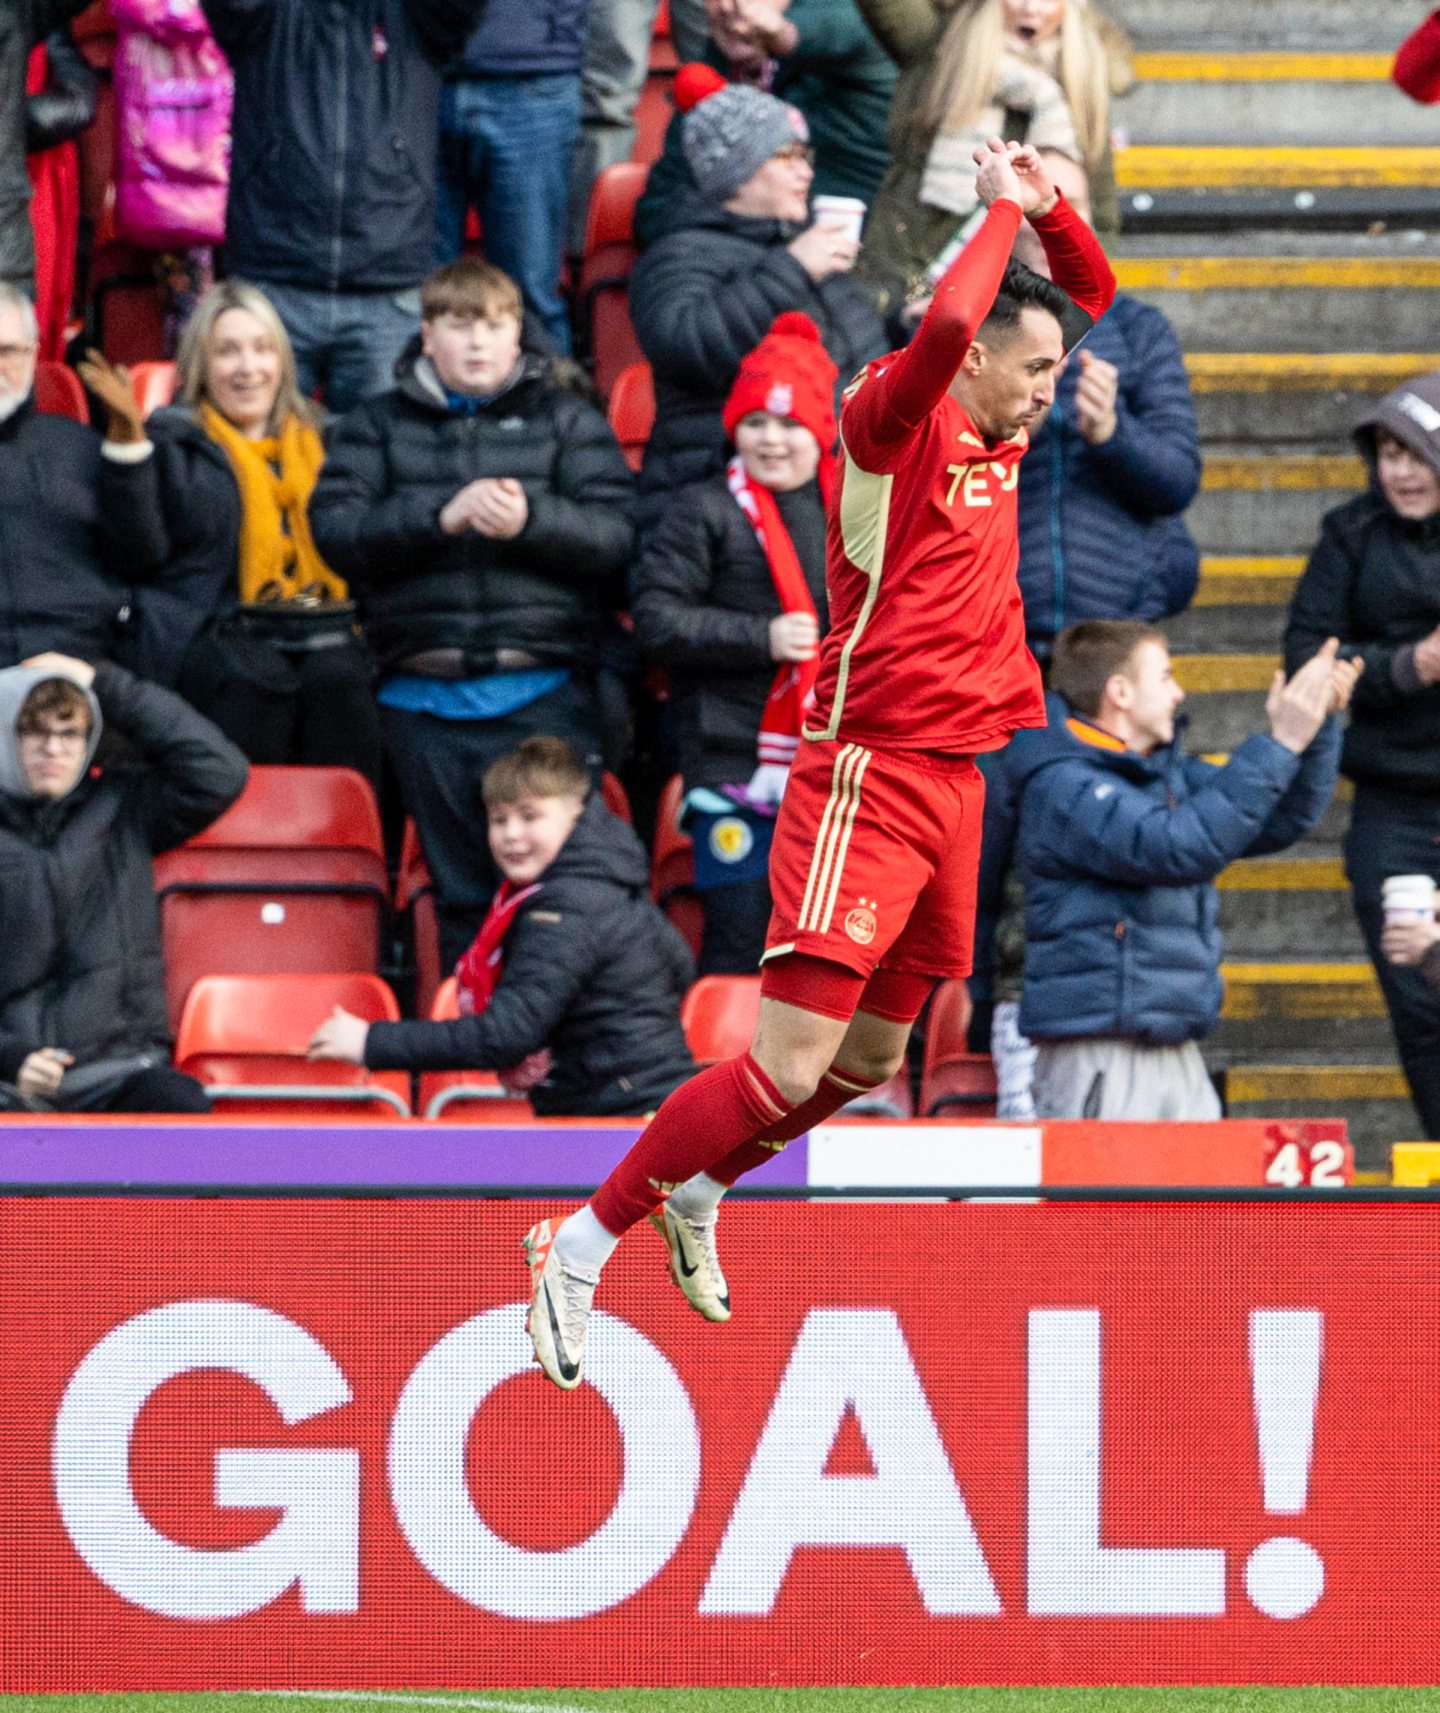 Aberdeen's Bojan Miovski celebrates as he scores to make it 1-0 against Celtic at Pittodrie. Image: SNS